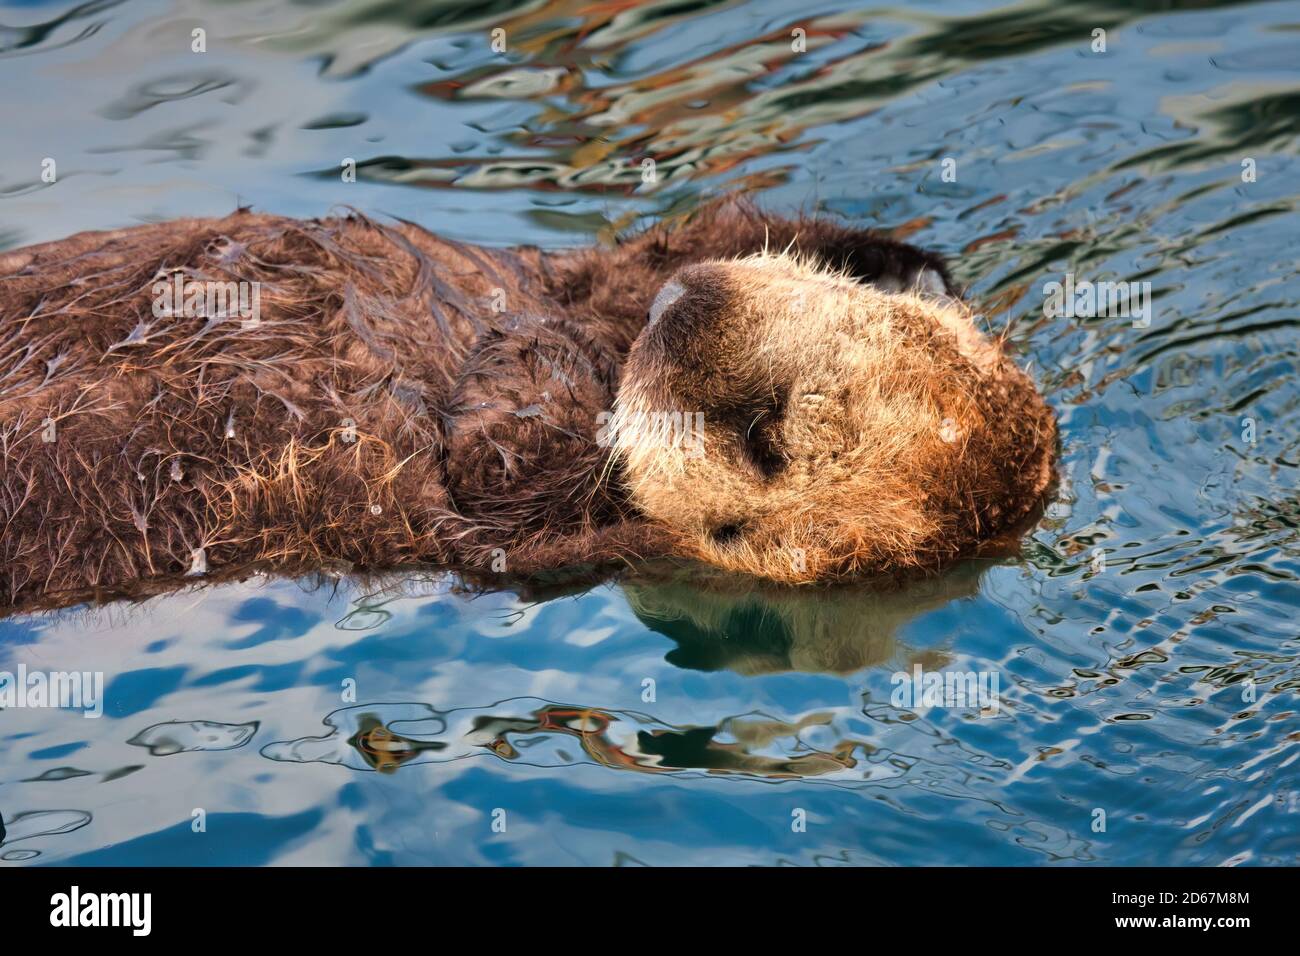 Baby sea otter floating on its back looking very cute. Stock Photo